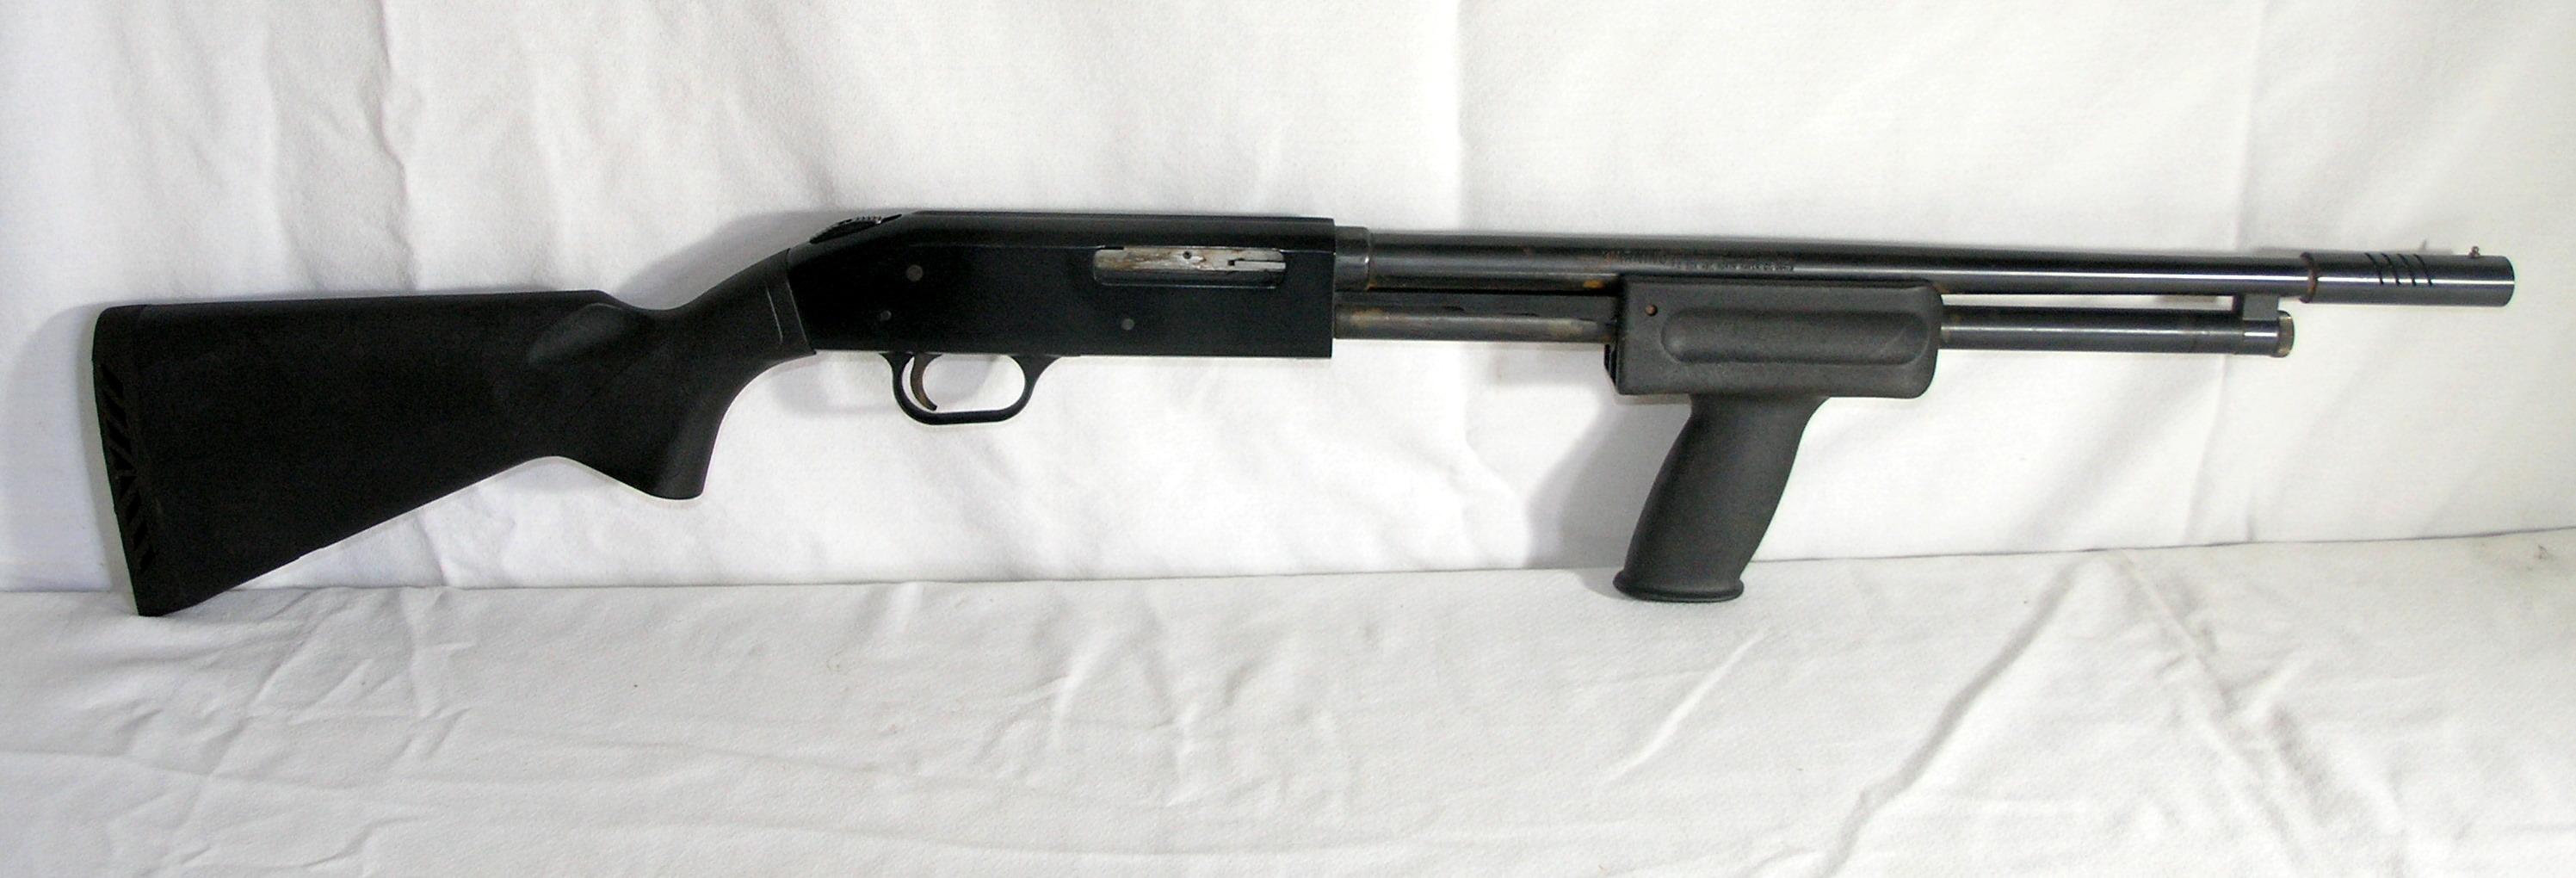 Mossberg 410 Pump with Pistol Grip. Made For security. Estimated Value: $30